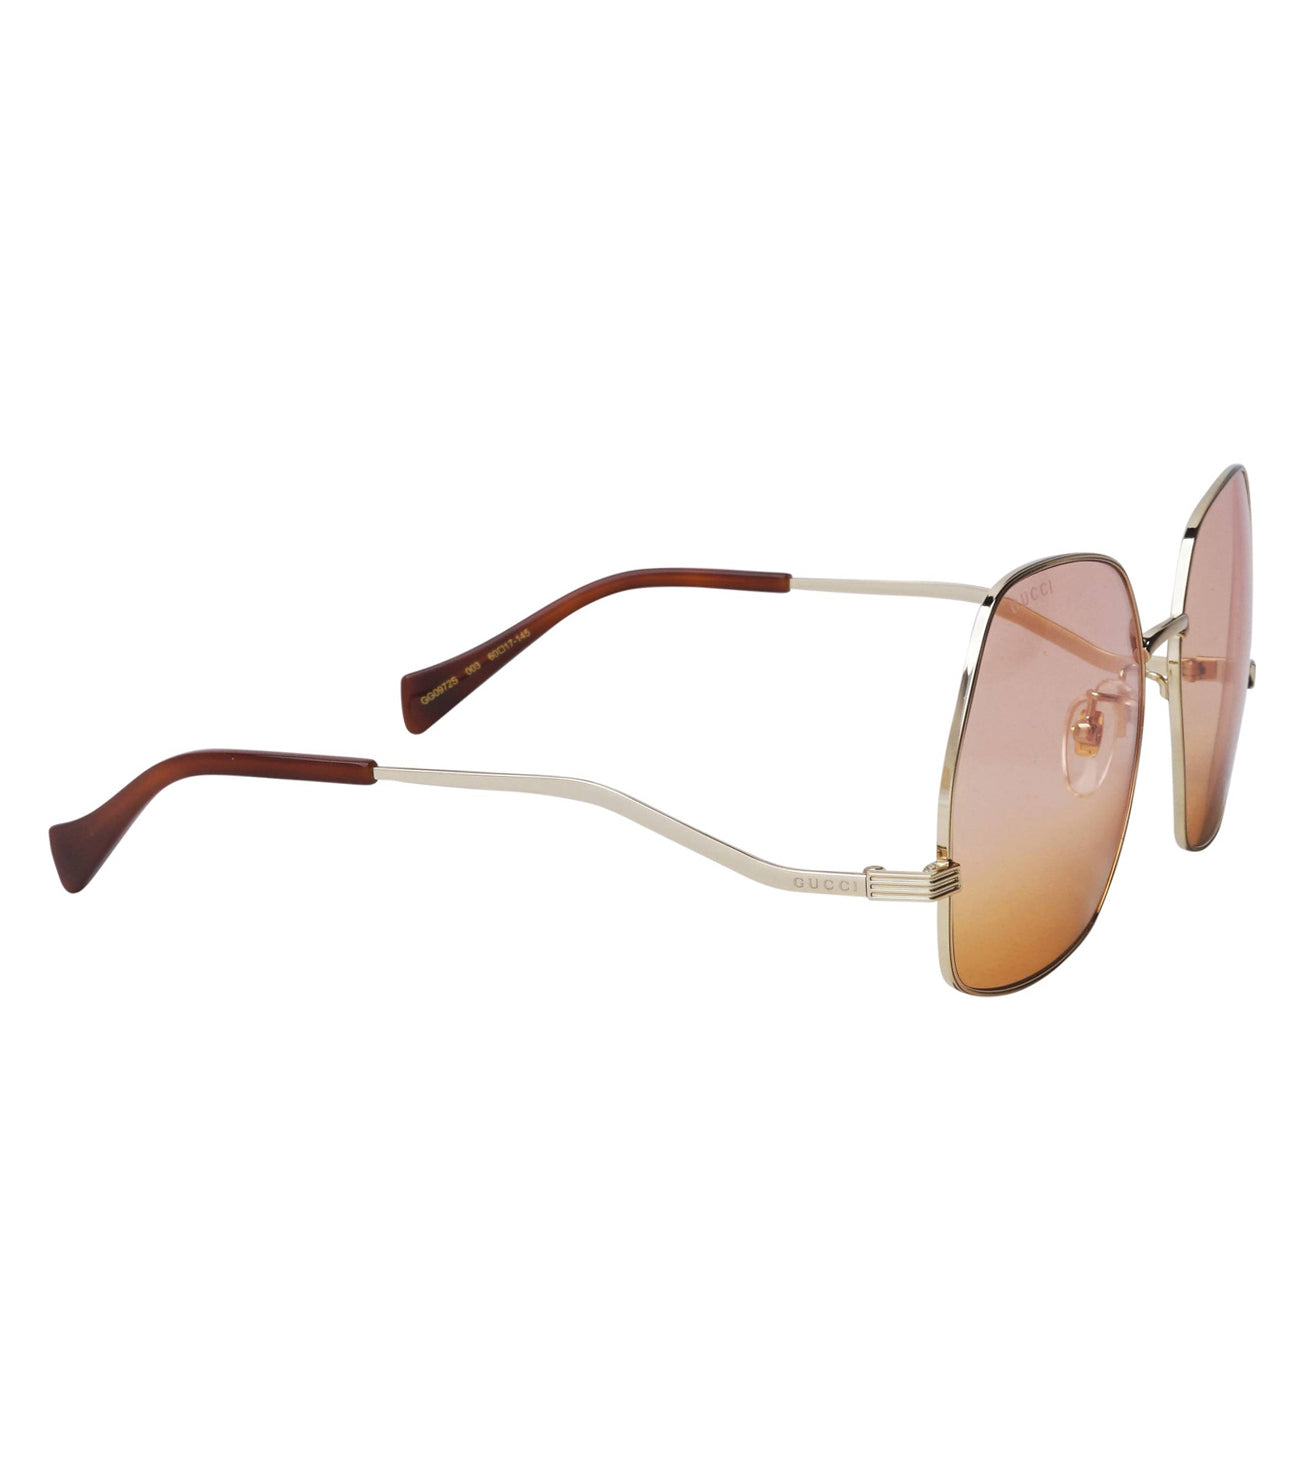 Gucci Women's Pink & Brown Butterfly Sunglasses